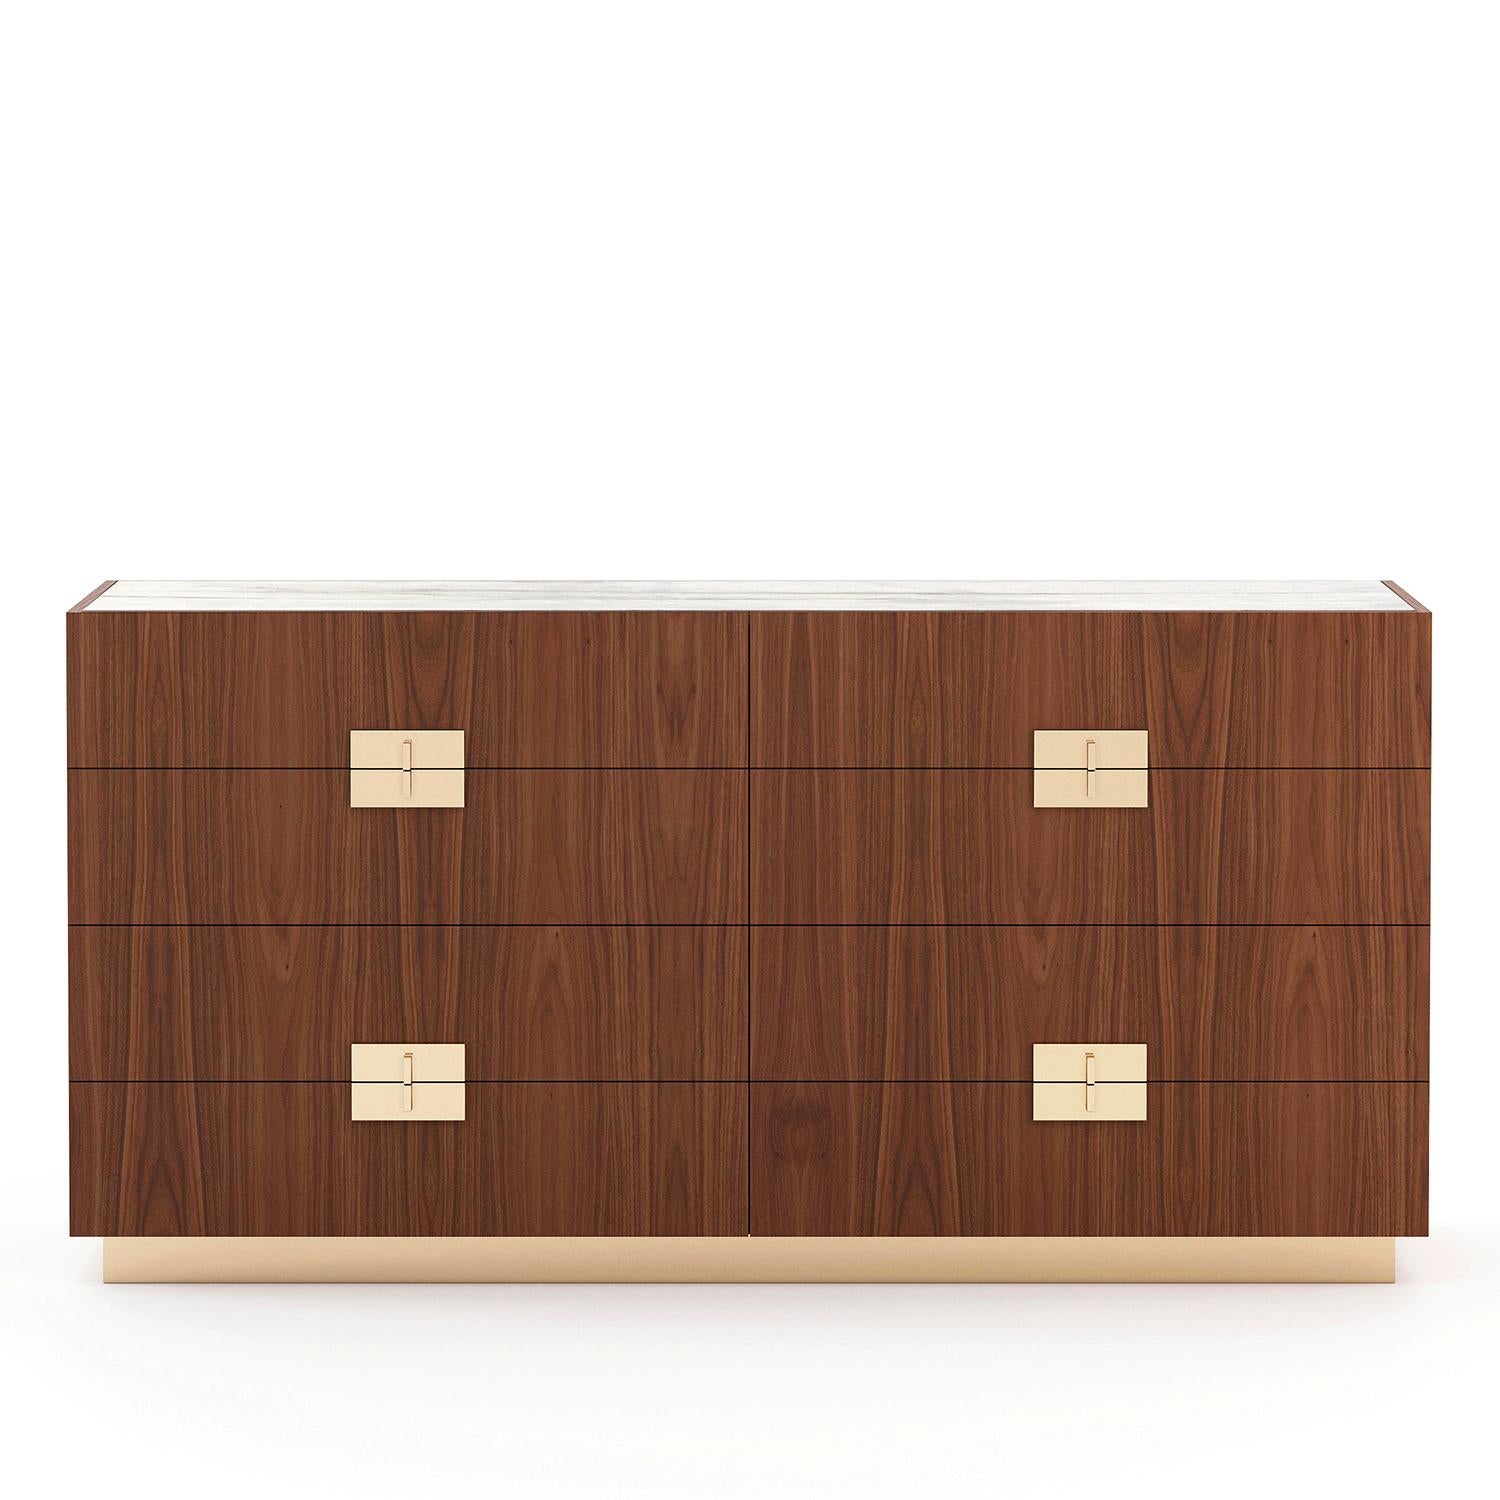 Chest of Drawers Lenny with structure in veneered walnut wood,
with white marble top. Chest with 8 drawers, with easy glide system. 
Base and handles in polished stainless steel in gold finish.
Also available with other wood and metal